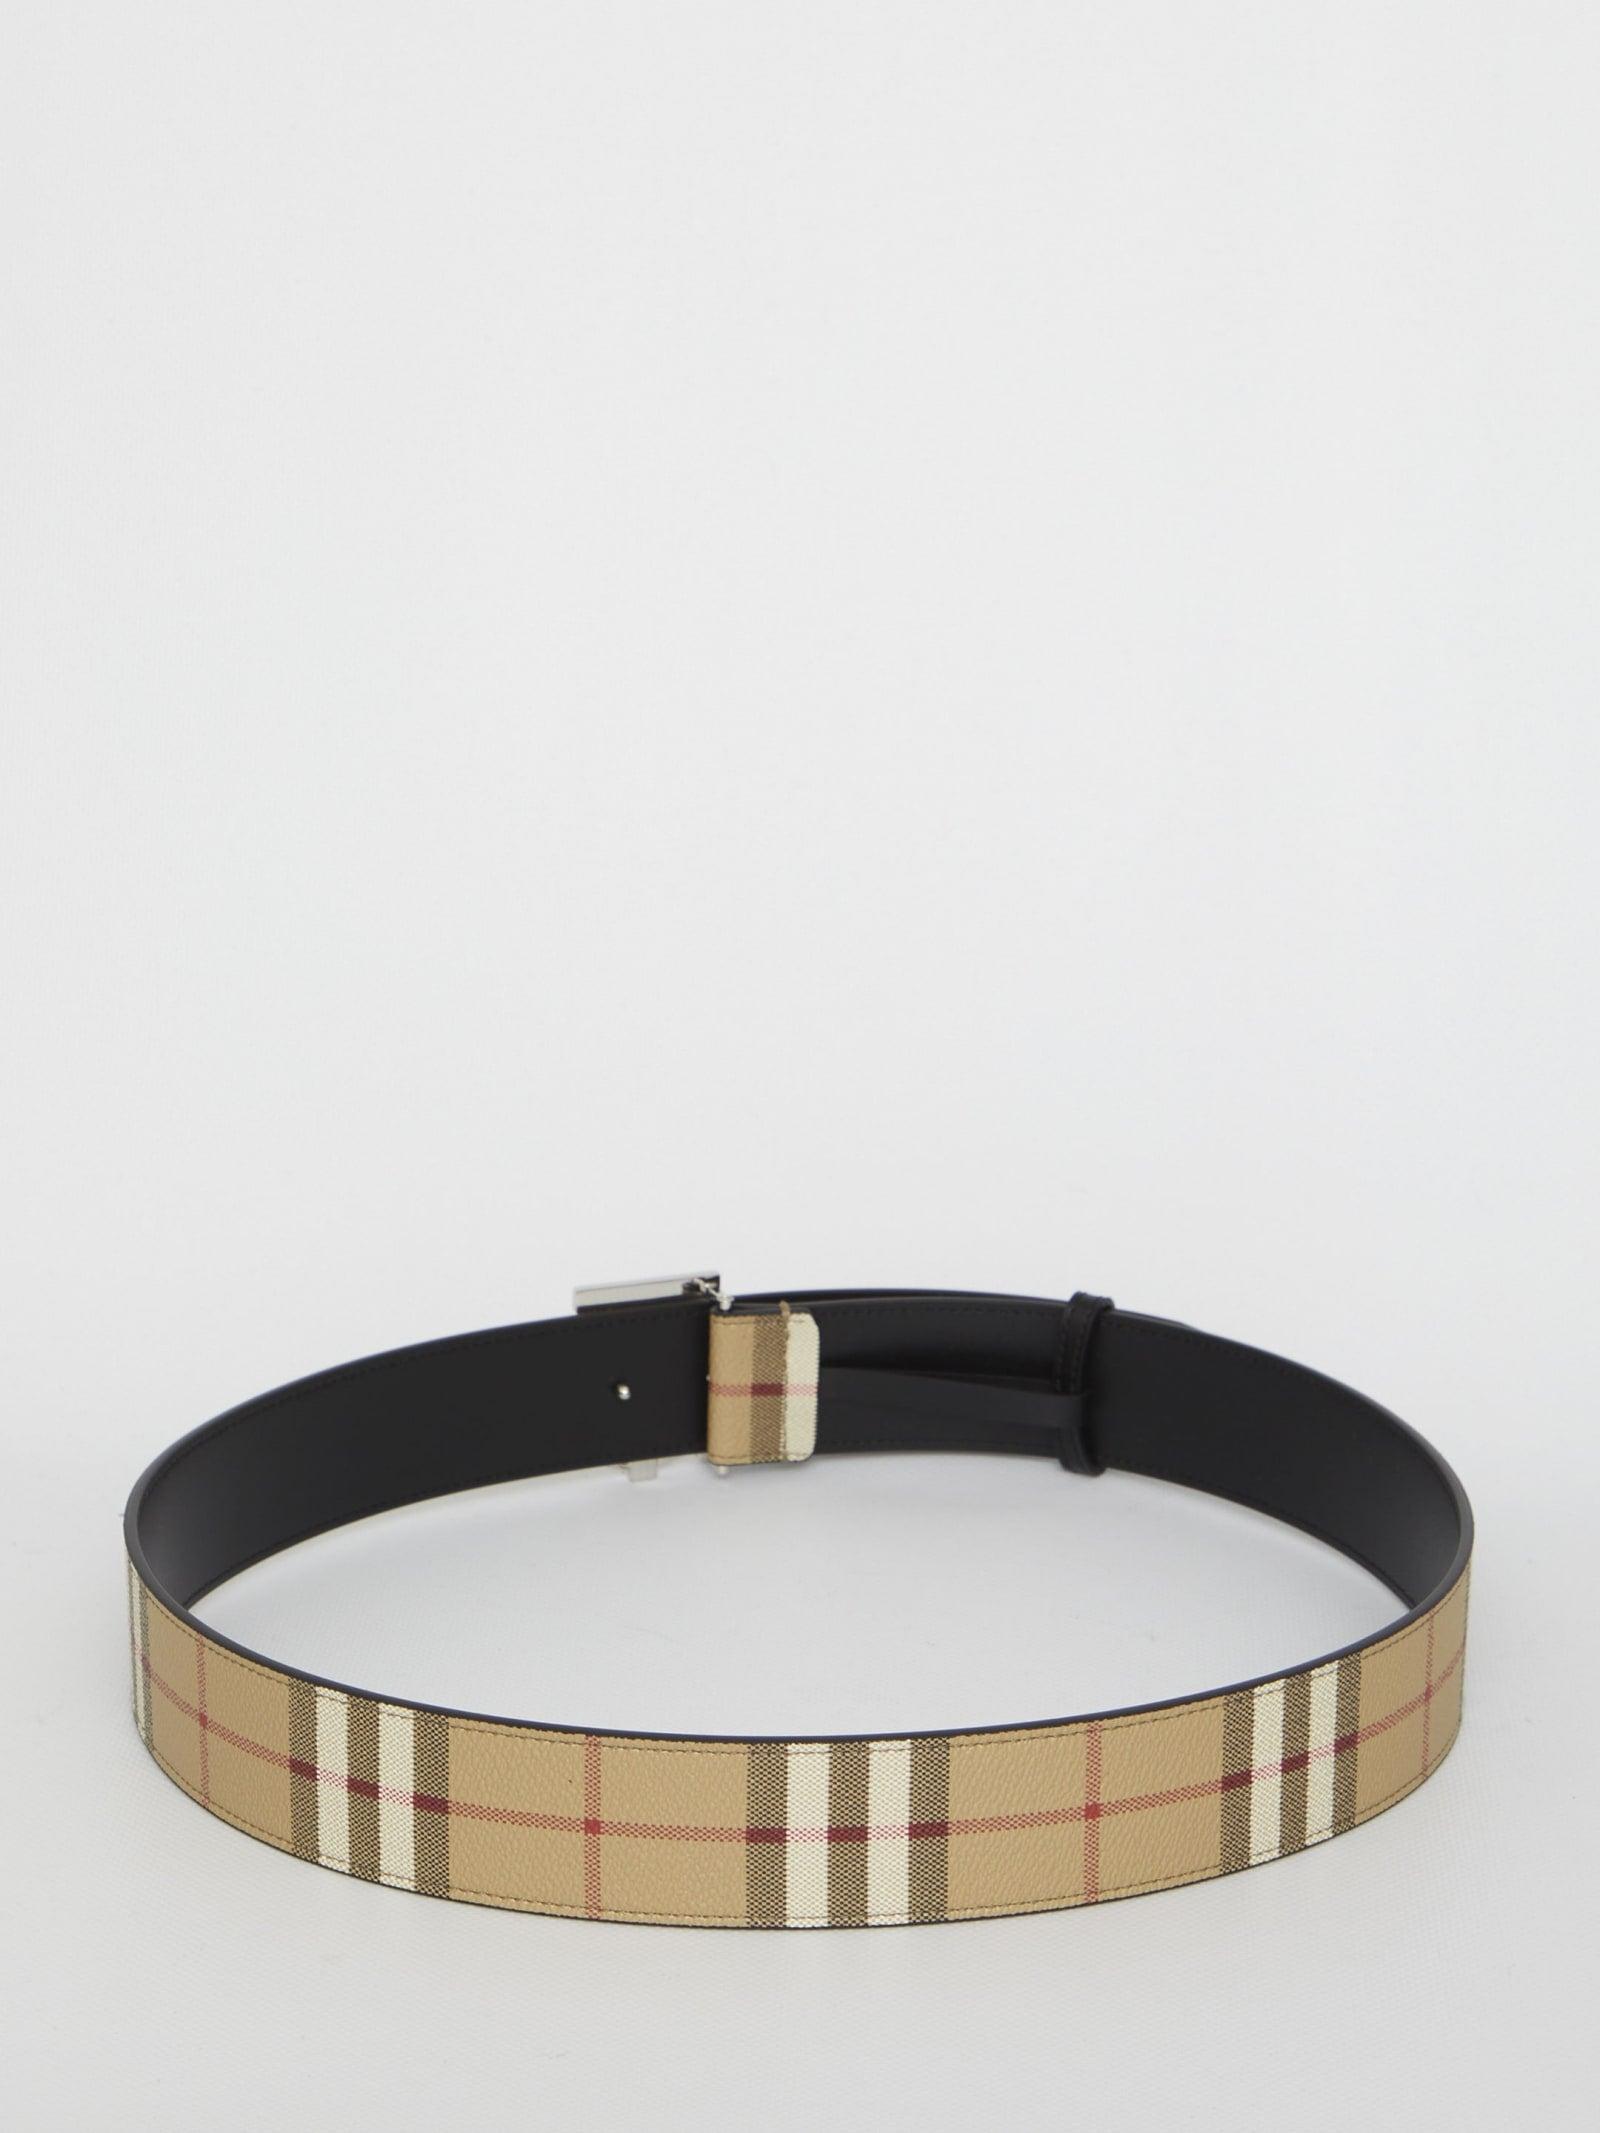 Burberry Tb Belt In Leather And Check in Gray for Men